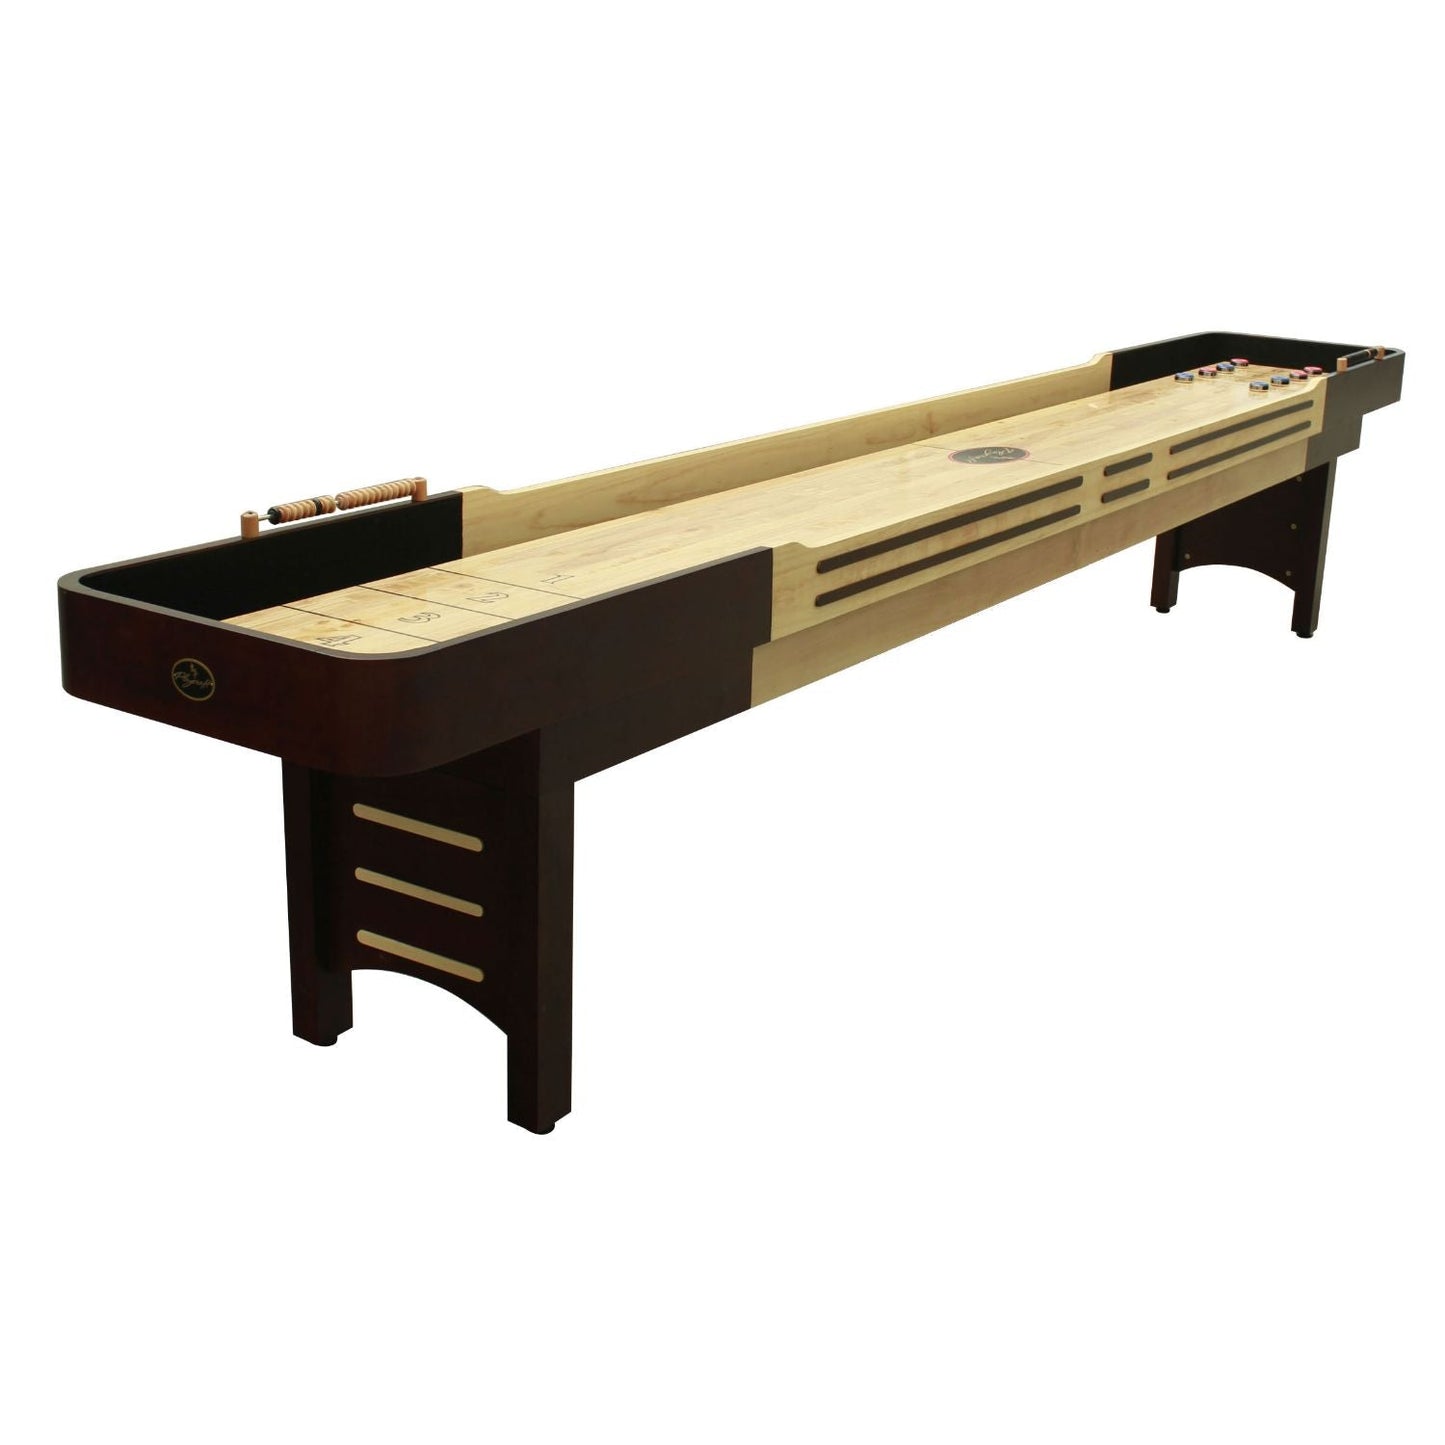 Playcraft Coventry Shuffleboard Table with Playing Accessories - Upper Livin